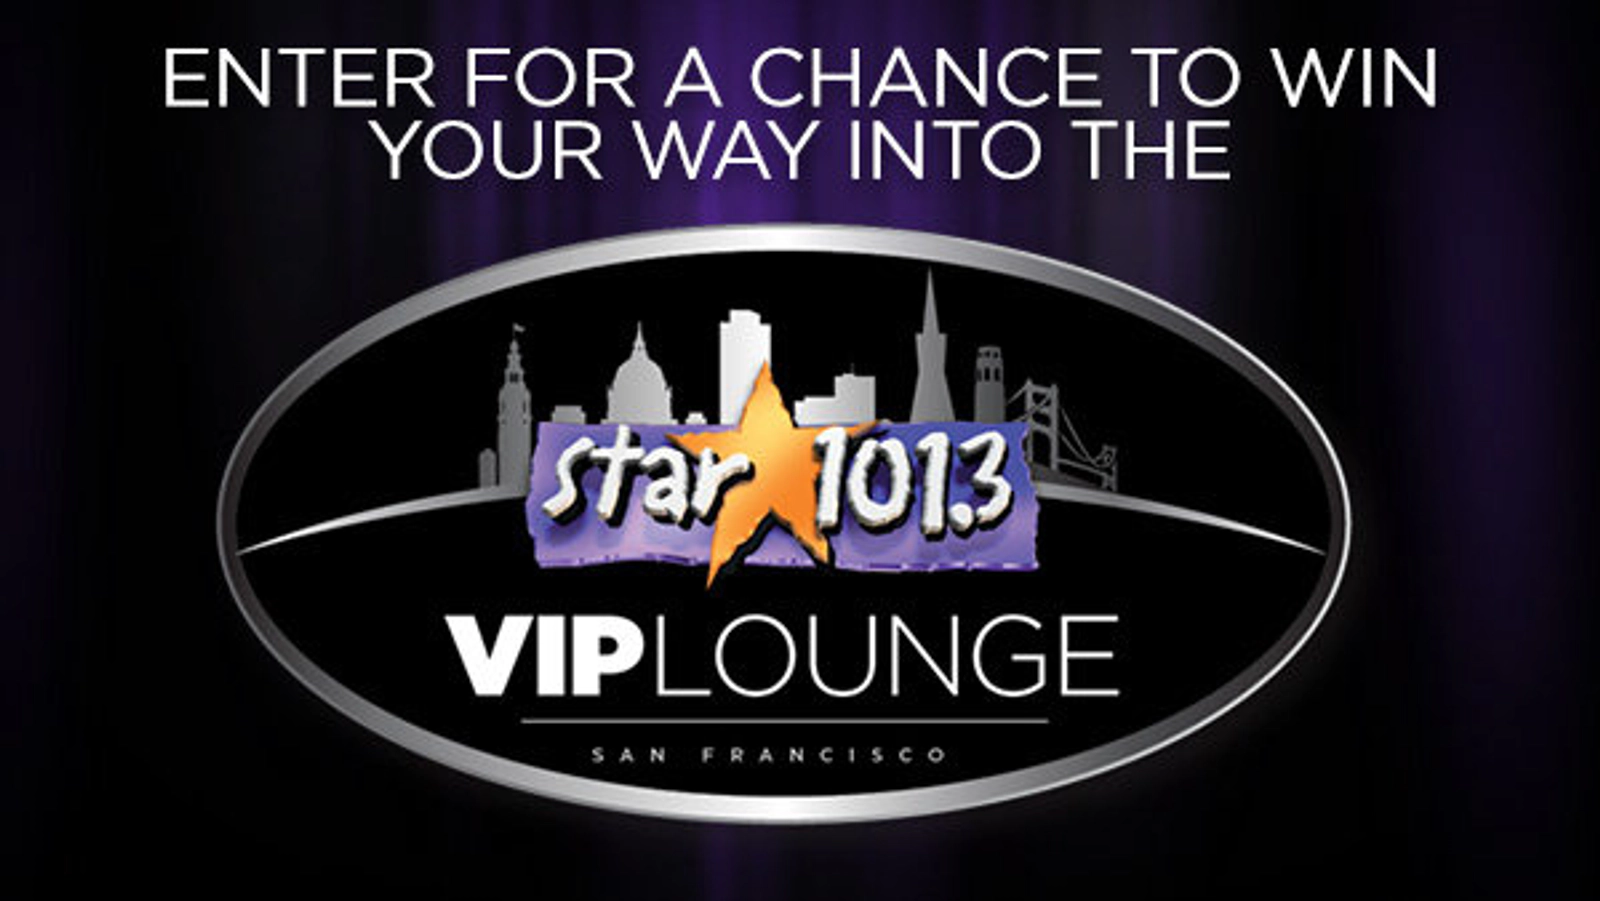 Star 101.3 Contests  Tickets, Trips & More